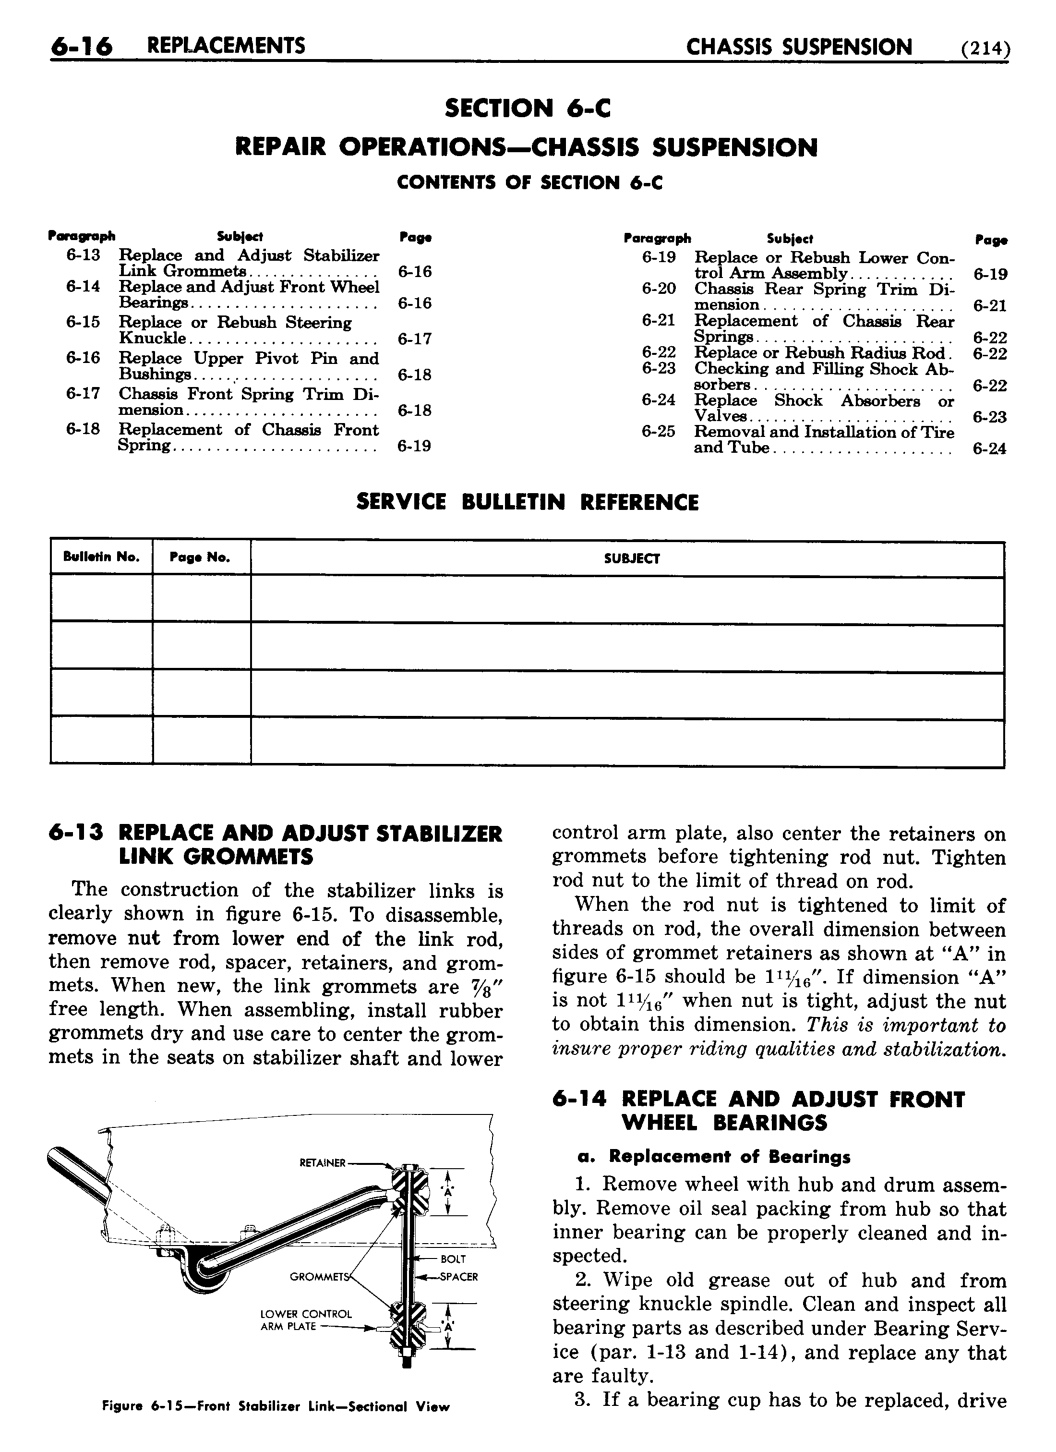 n_07 1948 Buick Shop Manual - Chassis Suspension-016-016.jpg